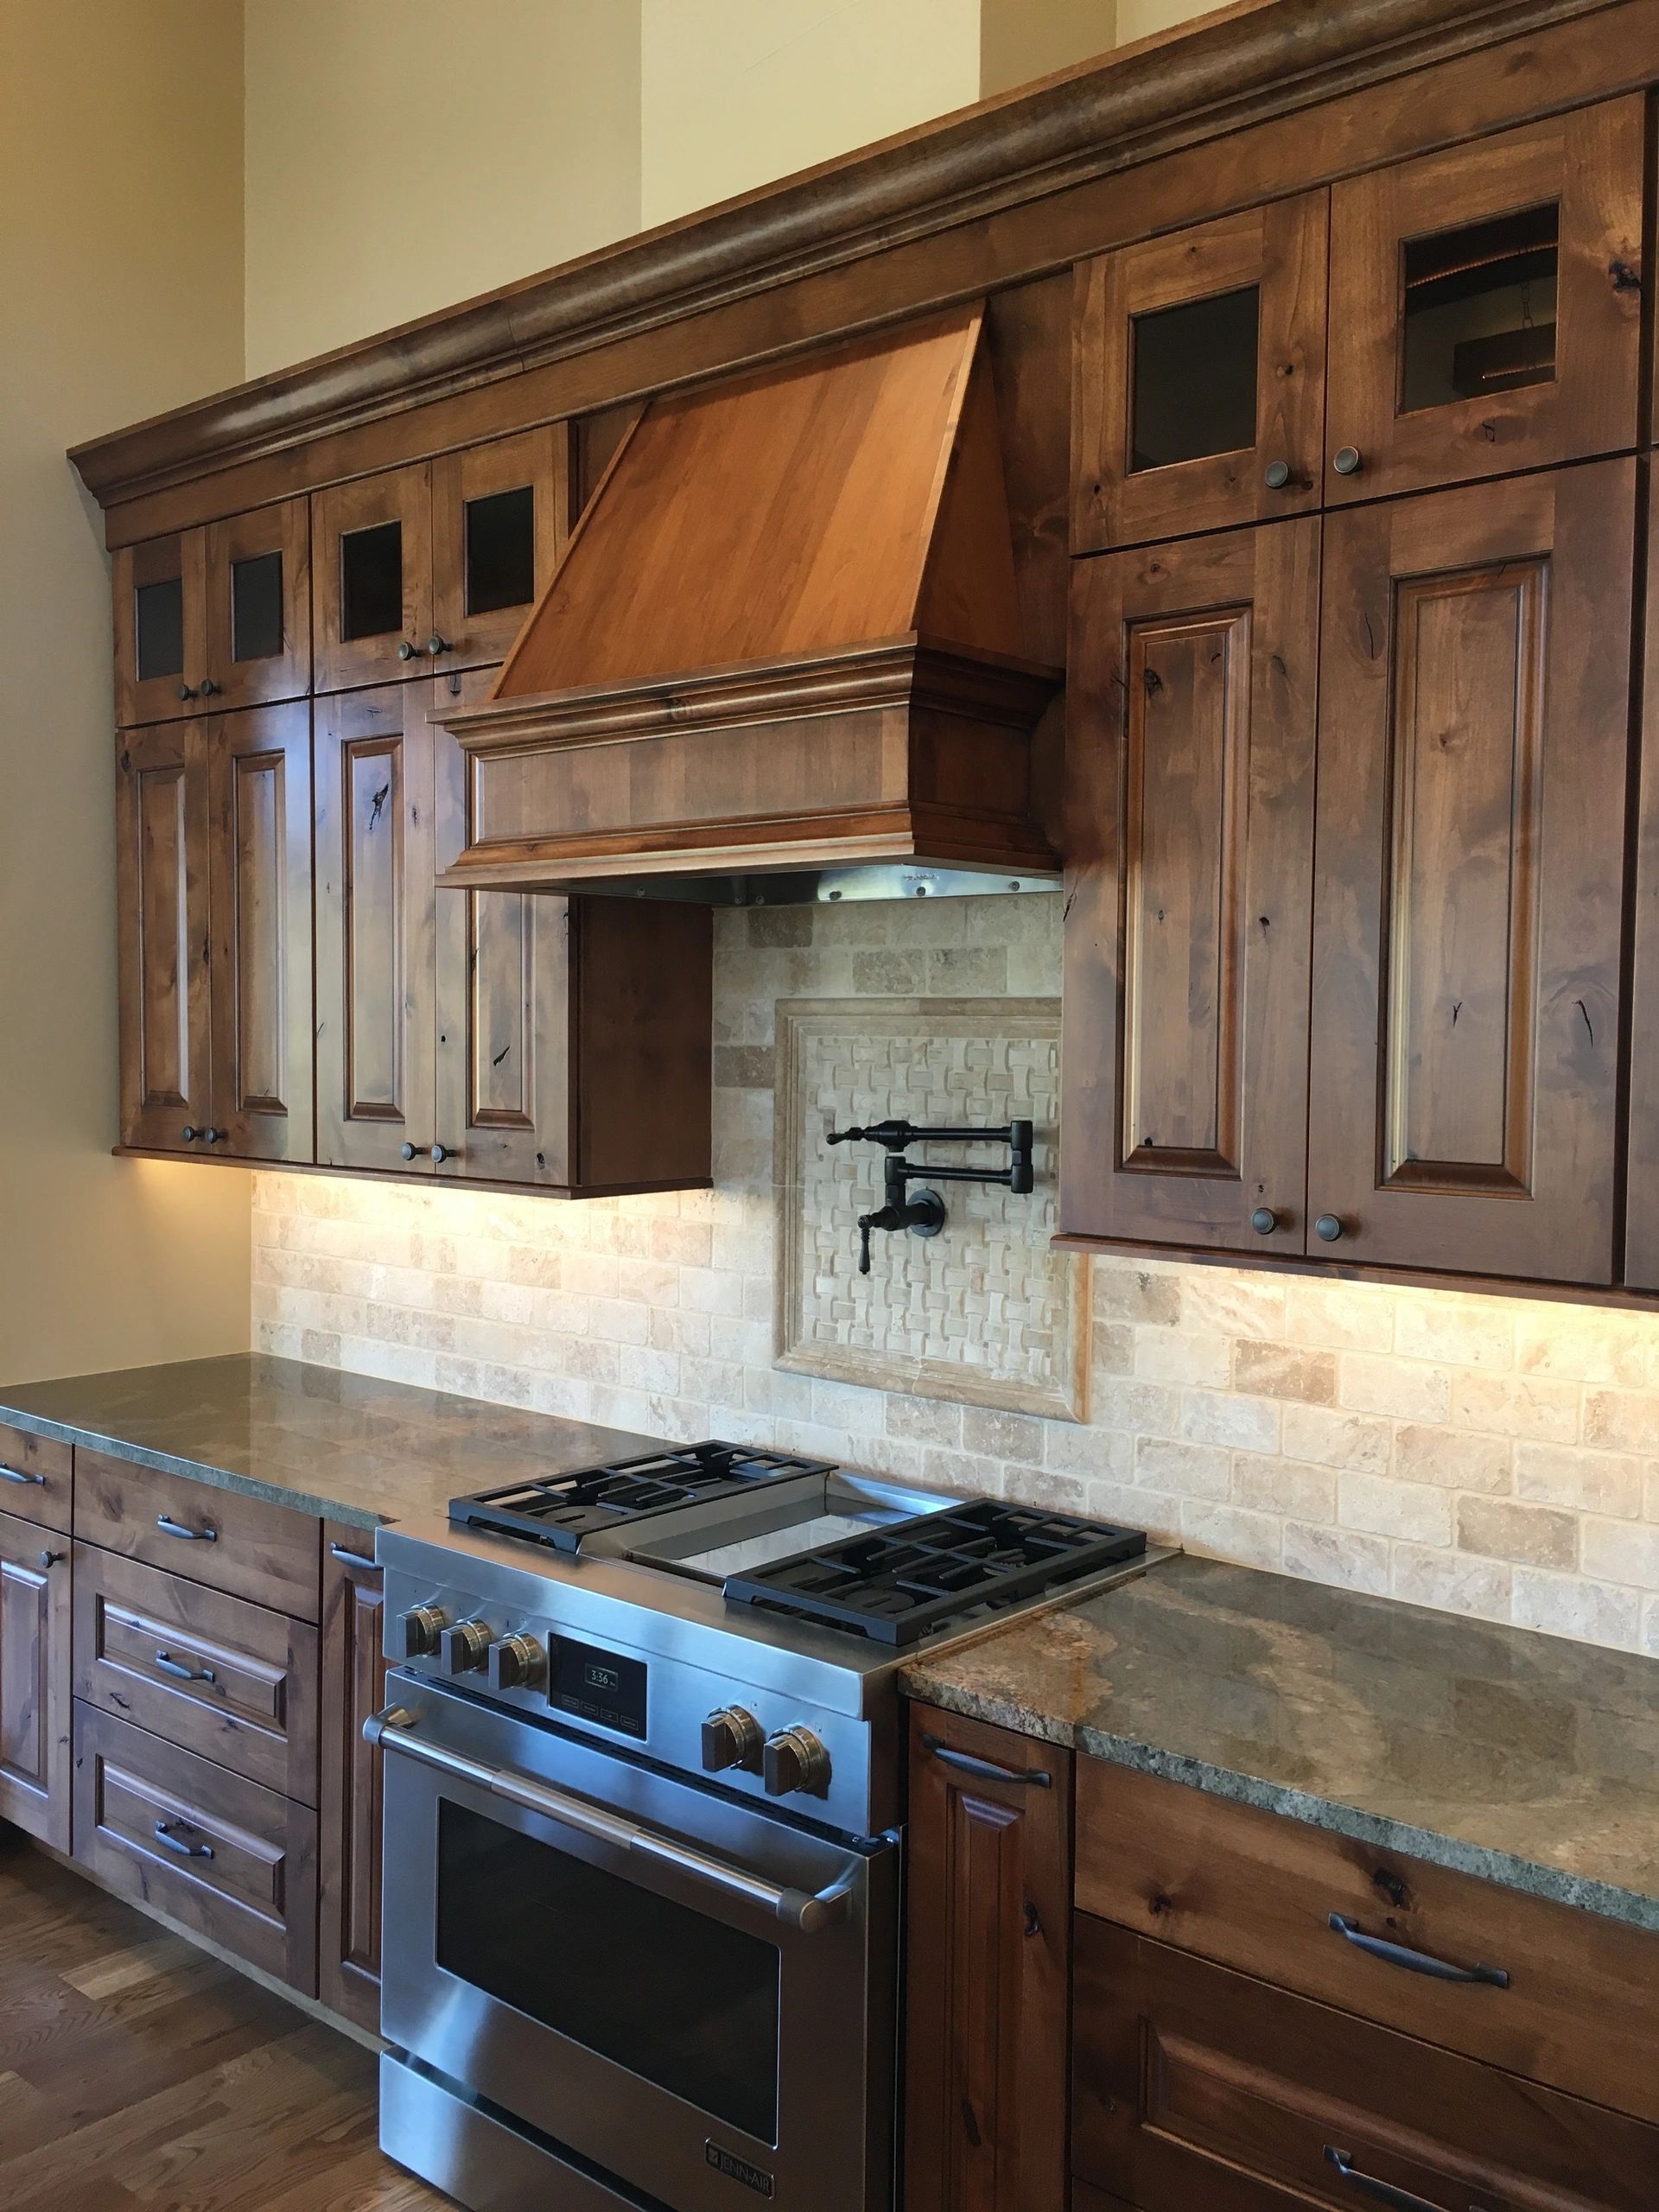 Cabinetry By Cales Inc